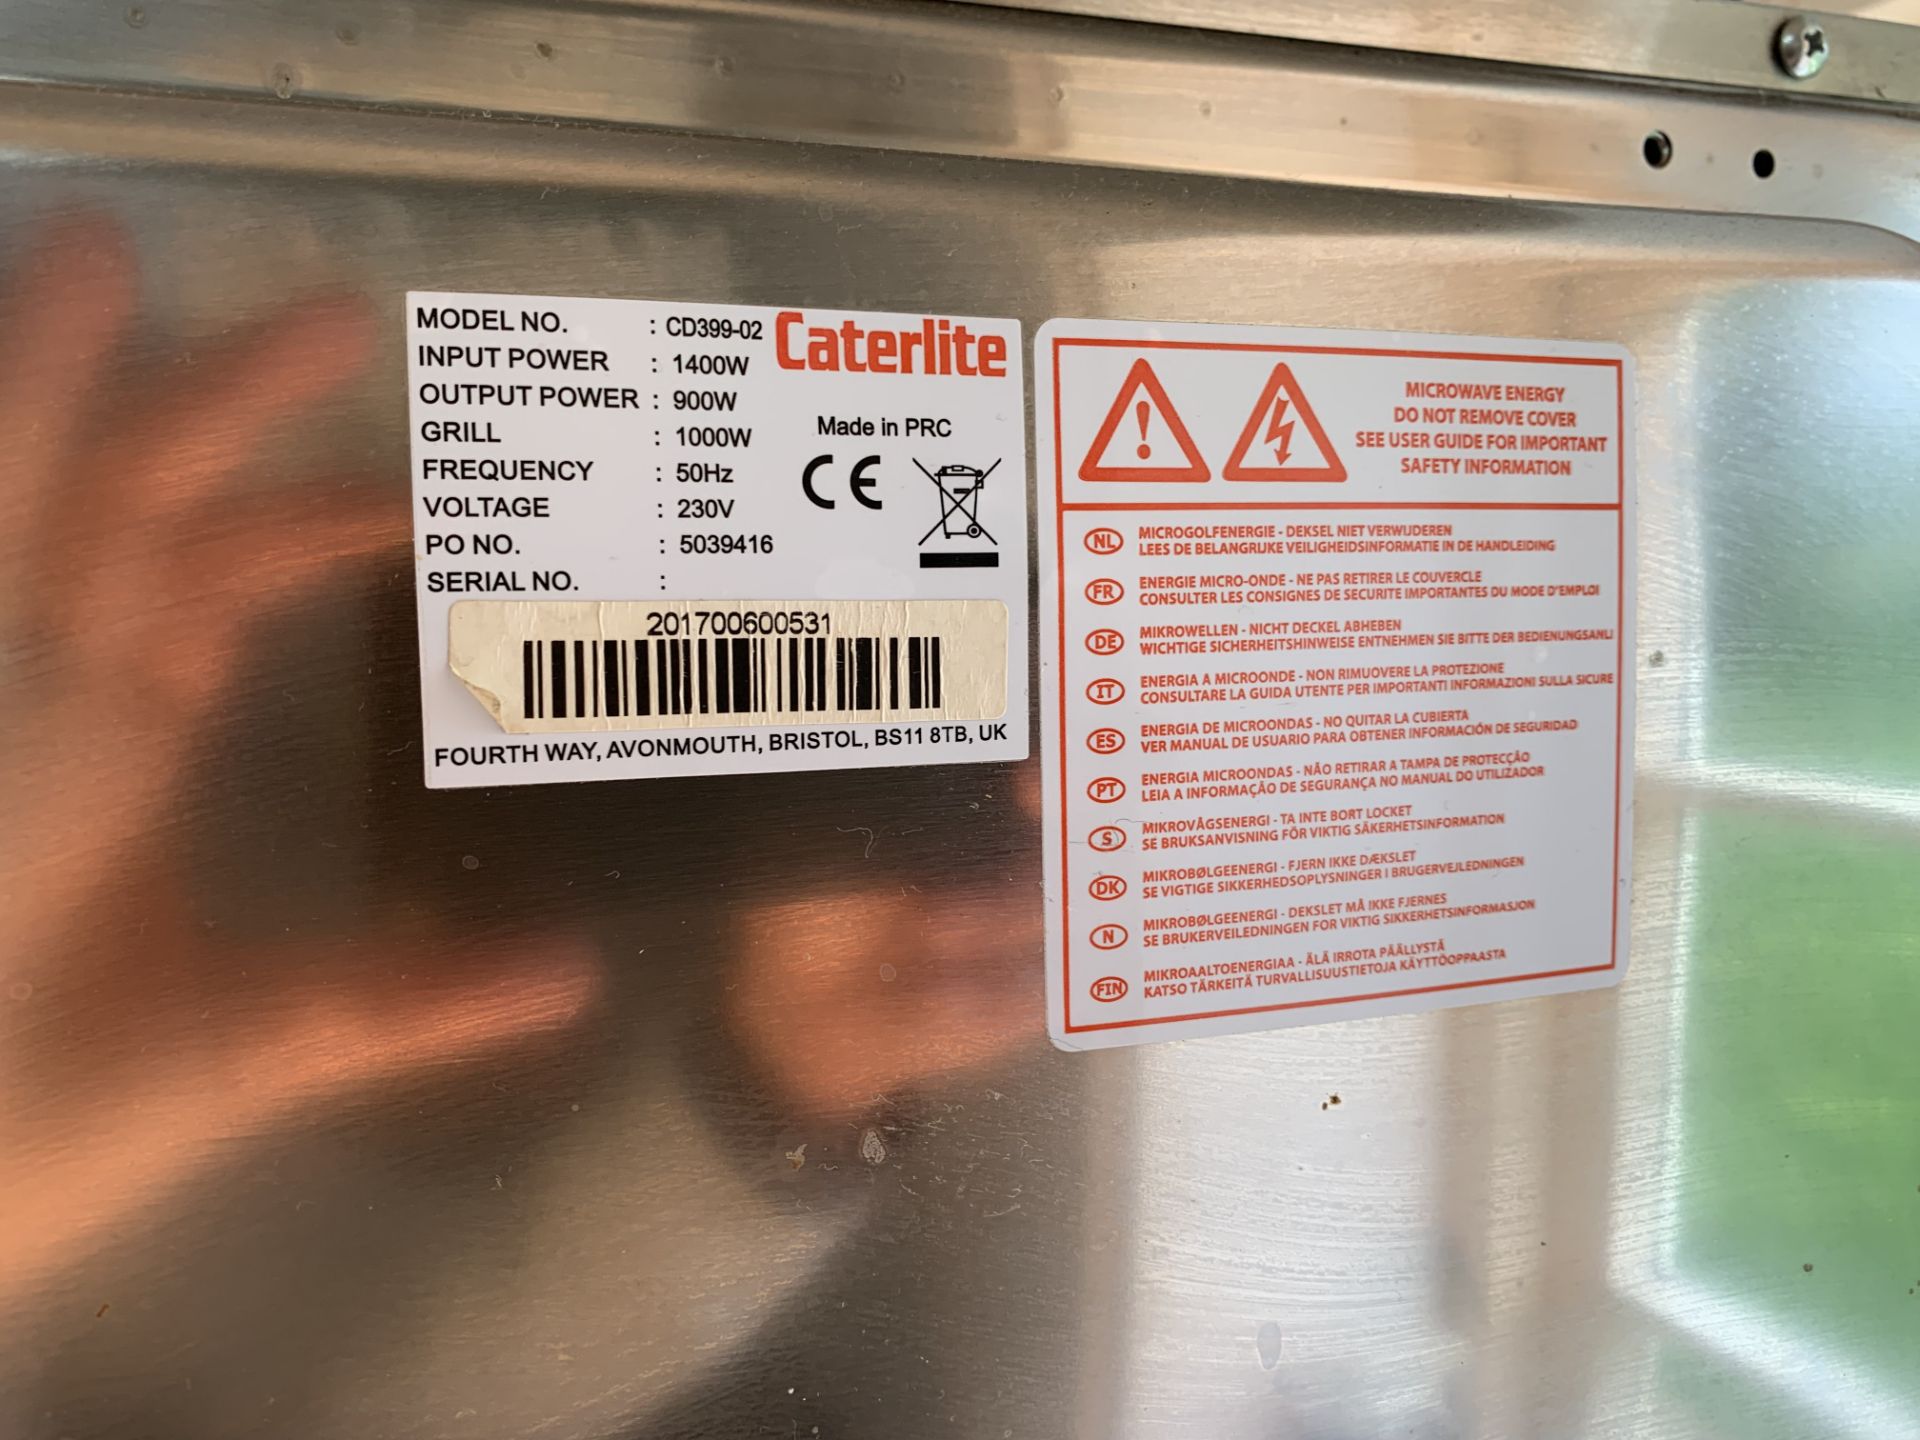 Caterlite CD399-02 microwave - Image 2 of 2